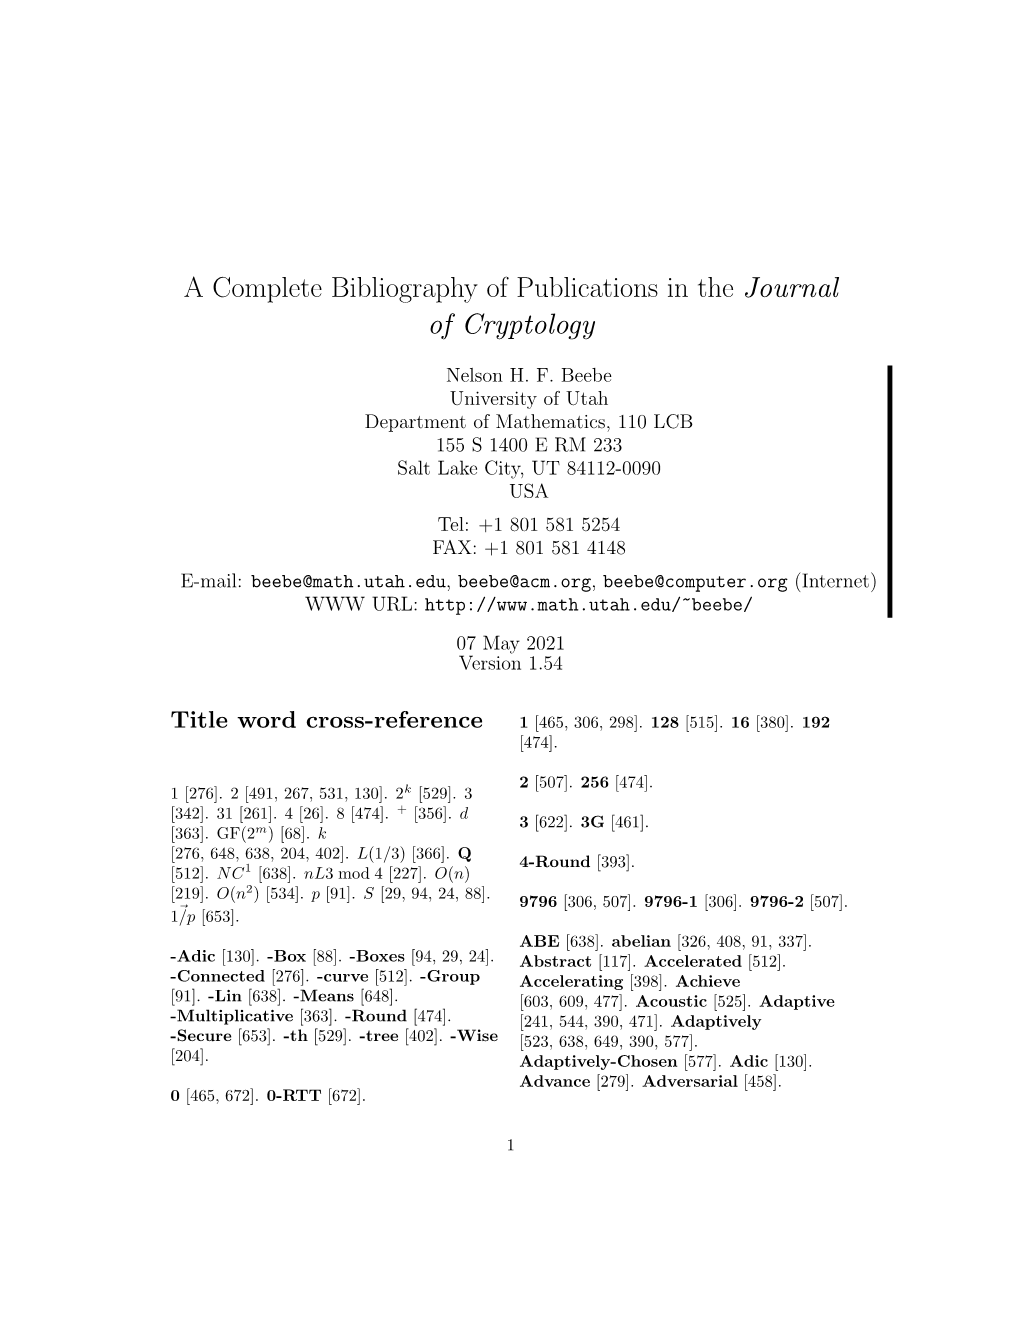 A Complete Bibliography of Publications in the Journal of Cryptology